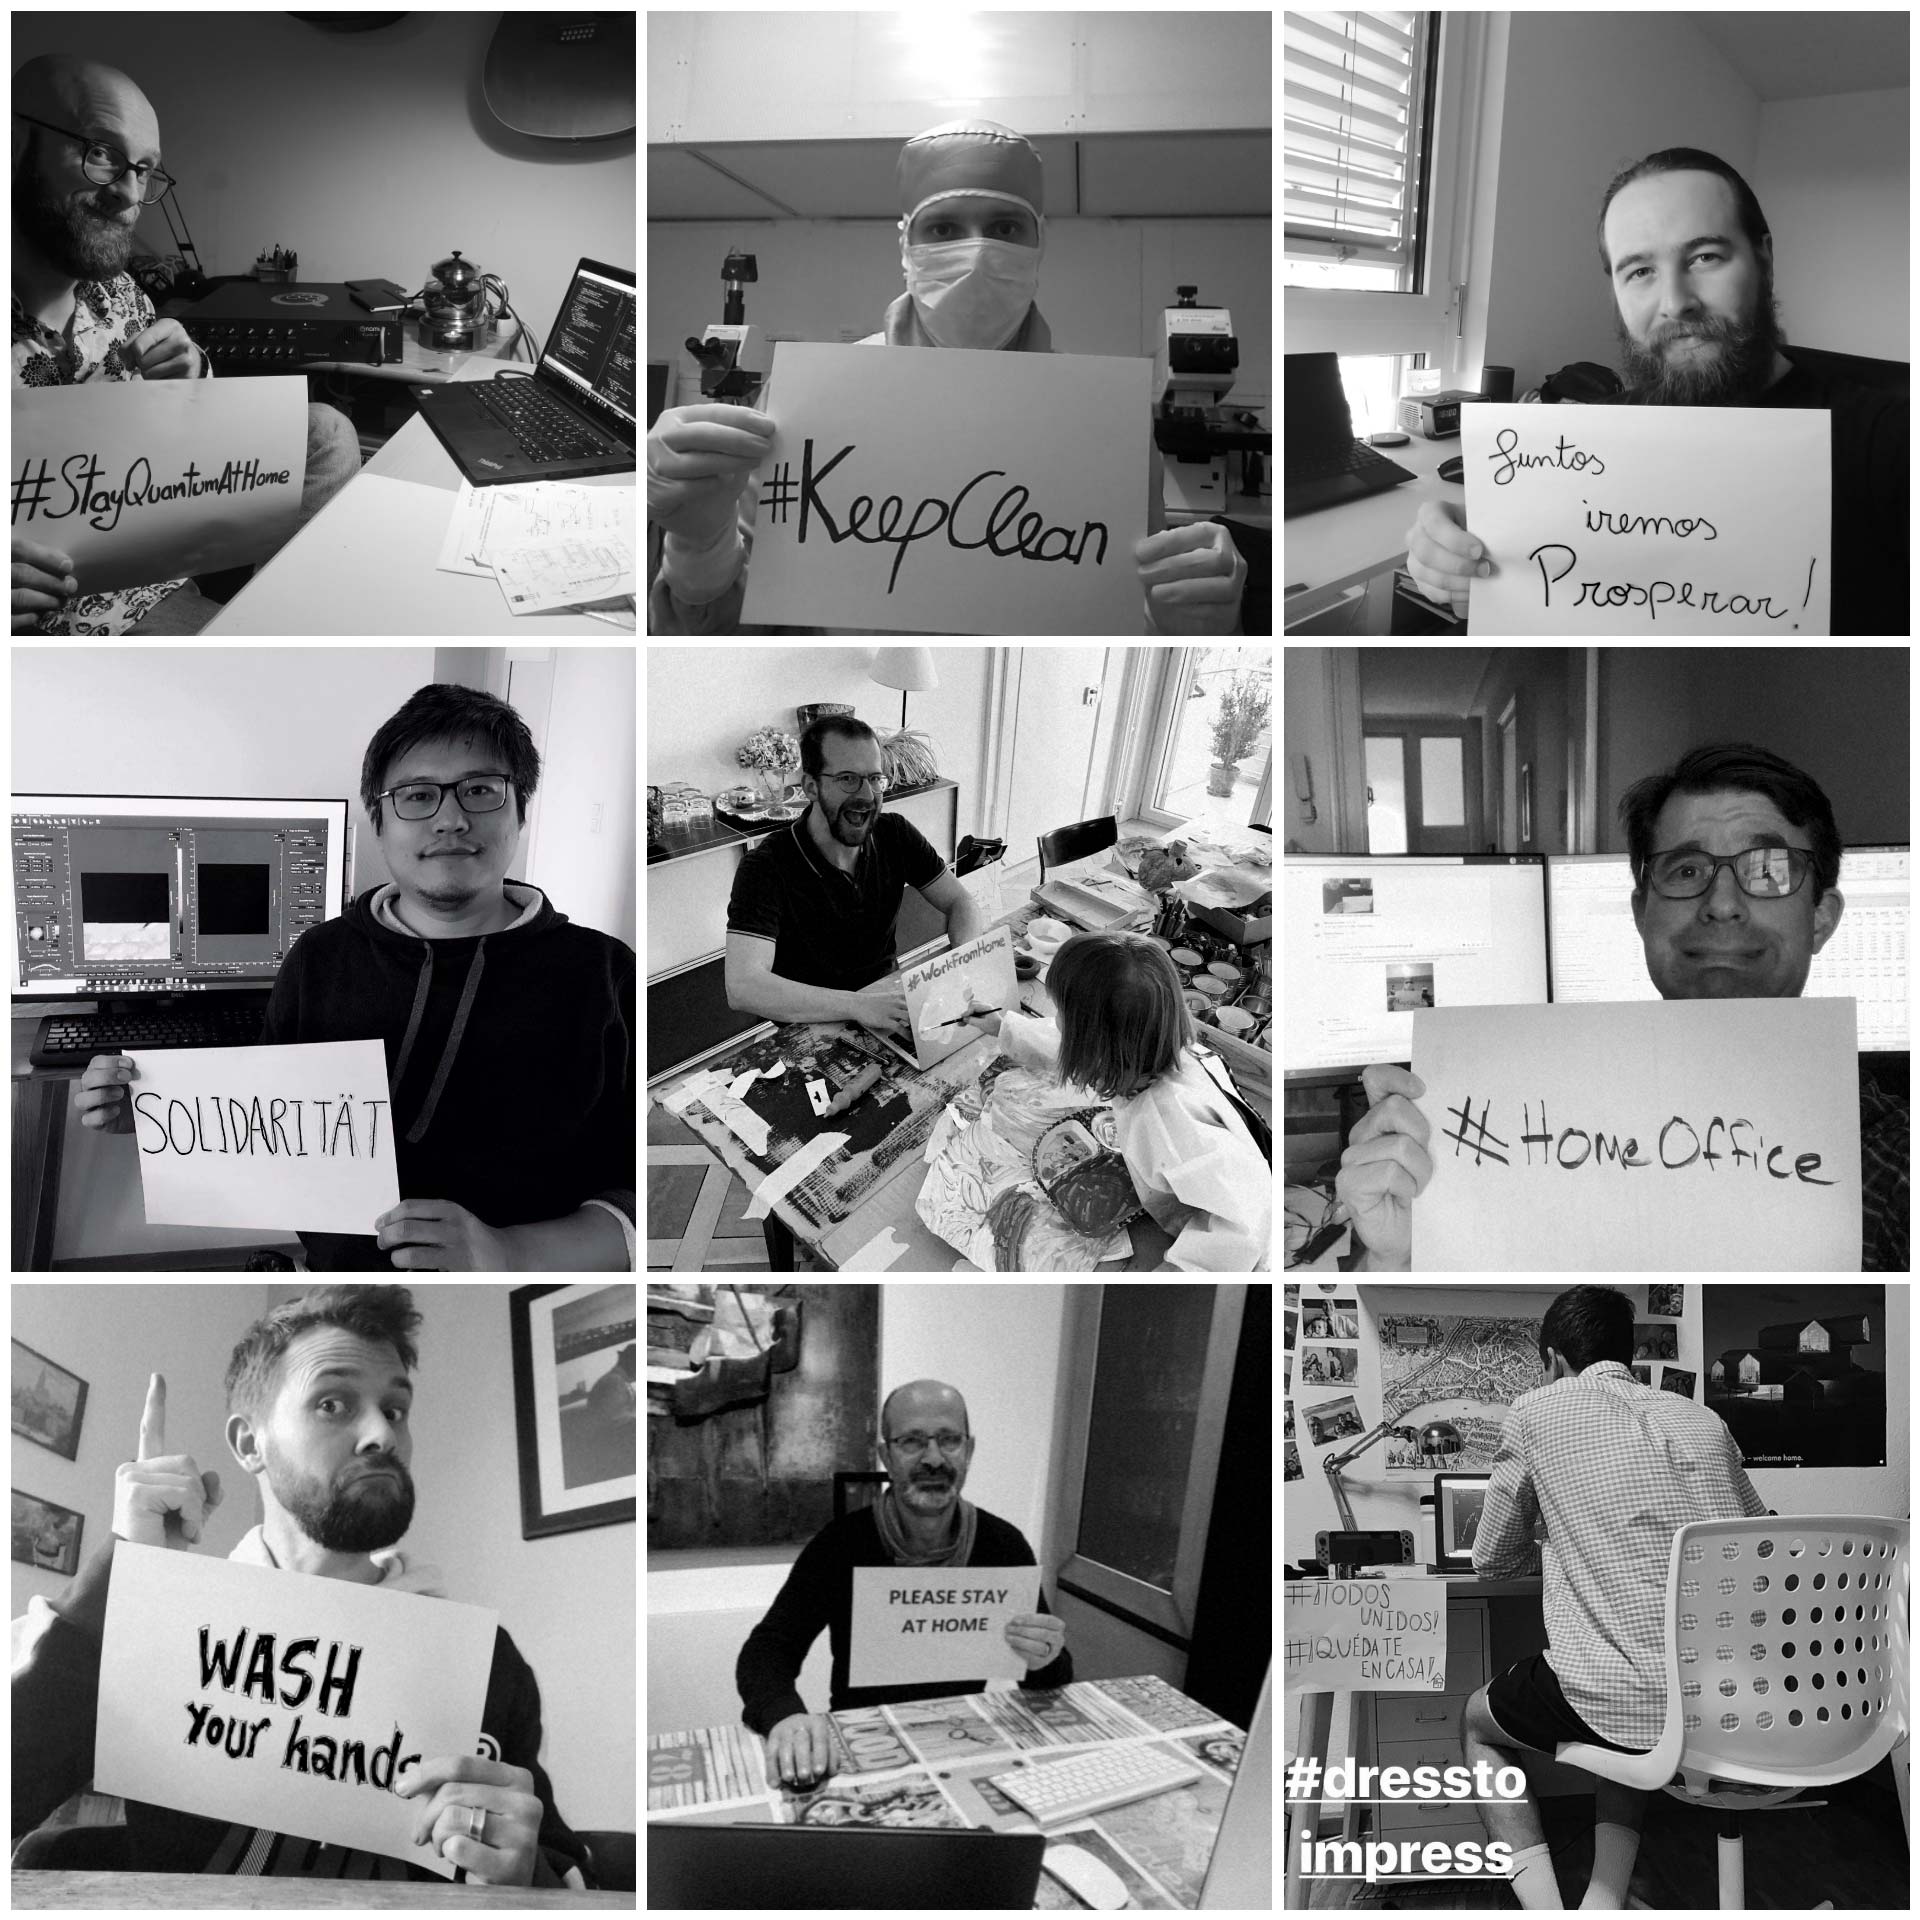 A collage with fun images of the Qnami team members in their home offices holding some paper messages